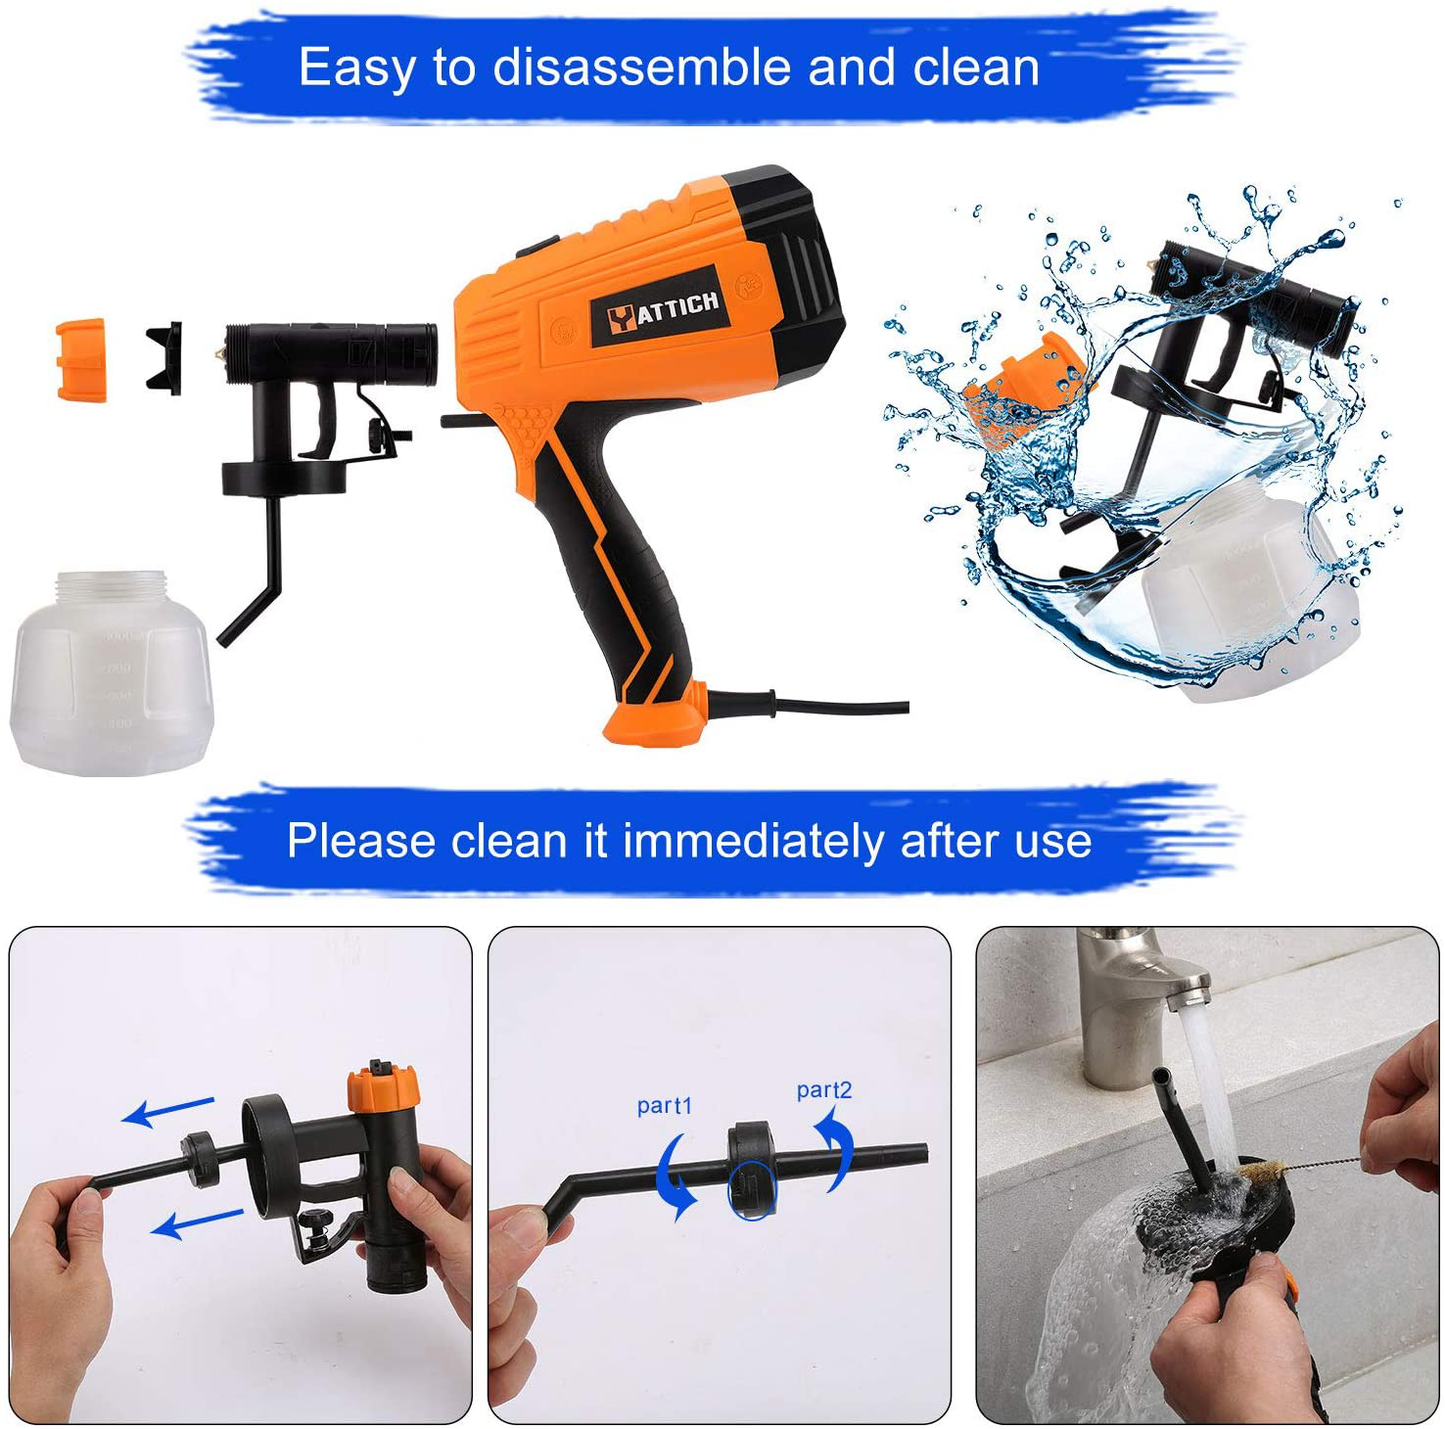 YATTICH Paint Sprayer, 700W High Power HVLP Spray Gun, 5 Copper Nozzles & 3 Patterns, Easy to Clean, for Furniture, Cabinets, Fence, Car, Bicycle, Garden Chairs etc. YT-201-A